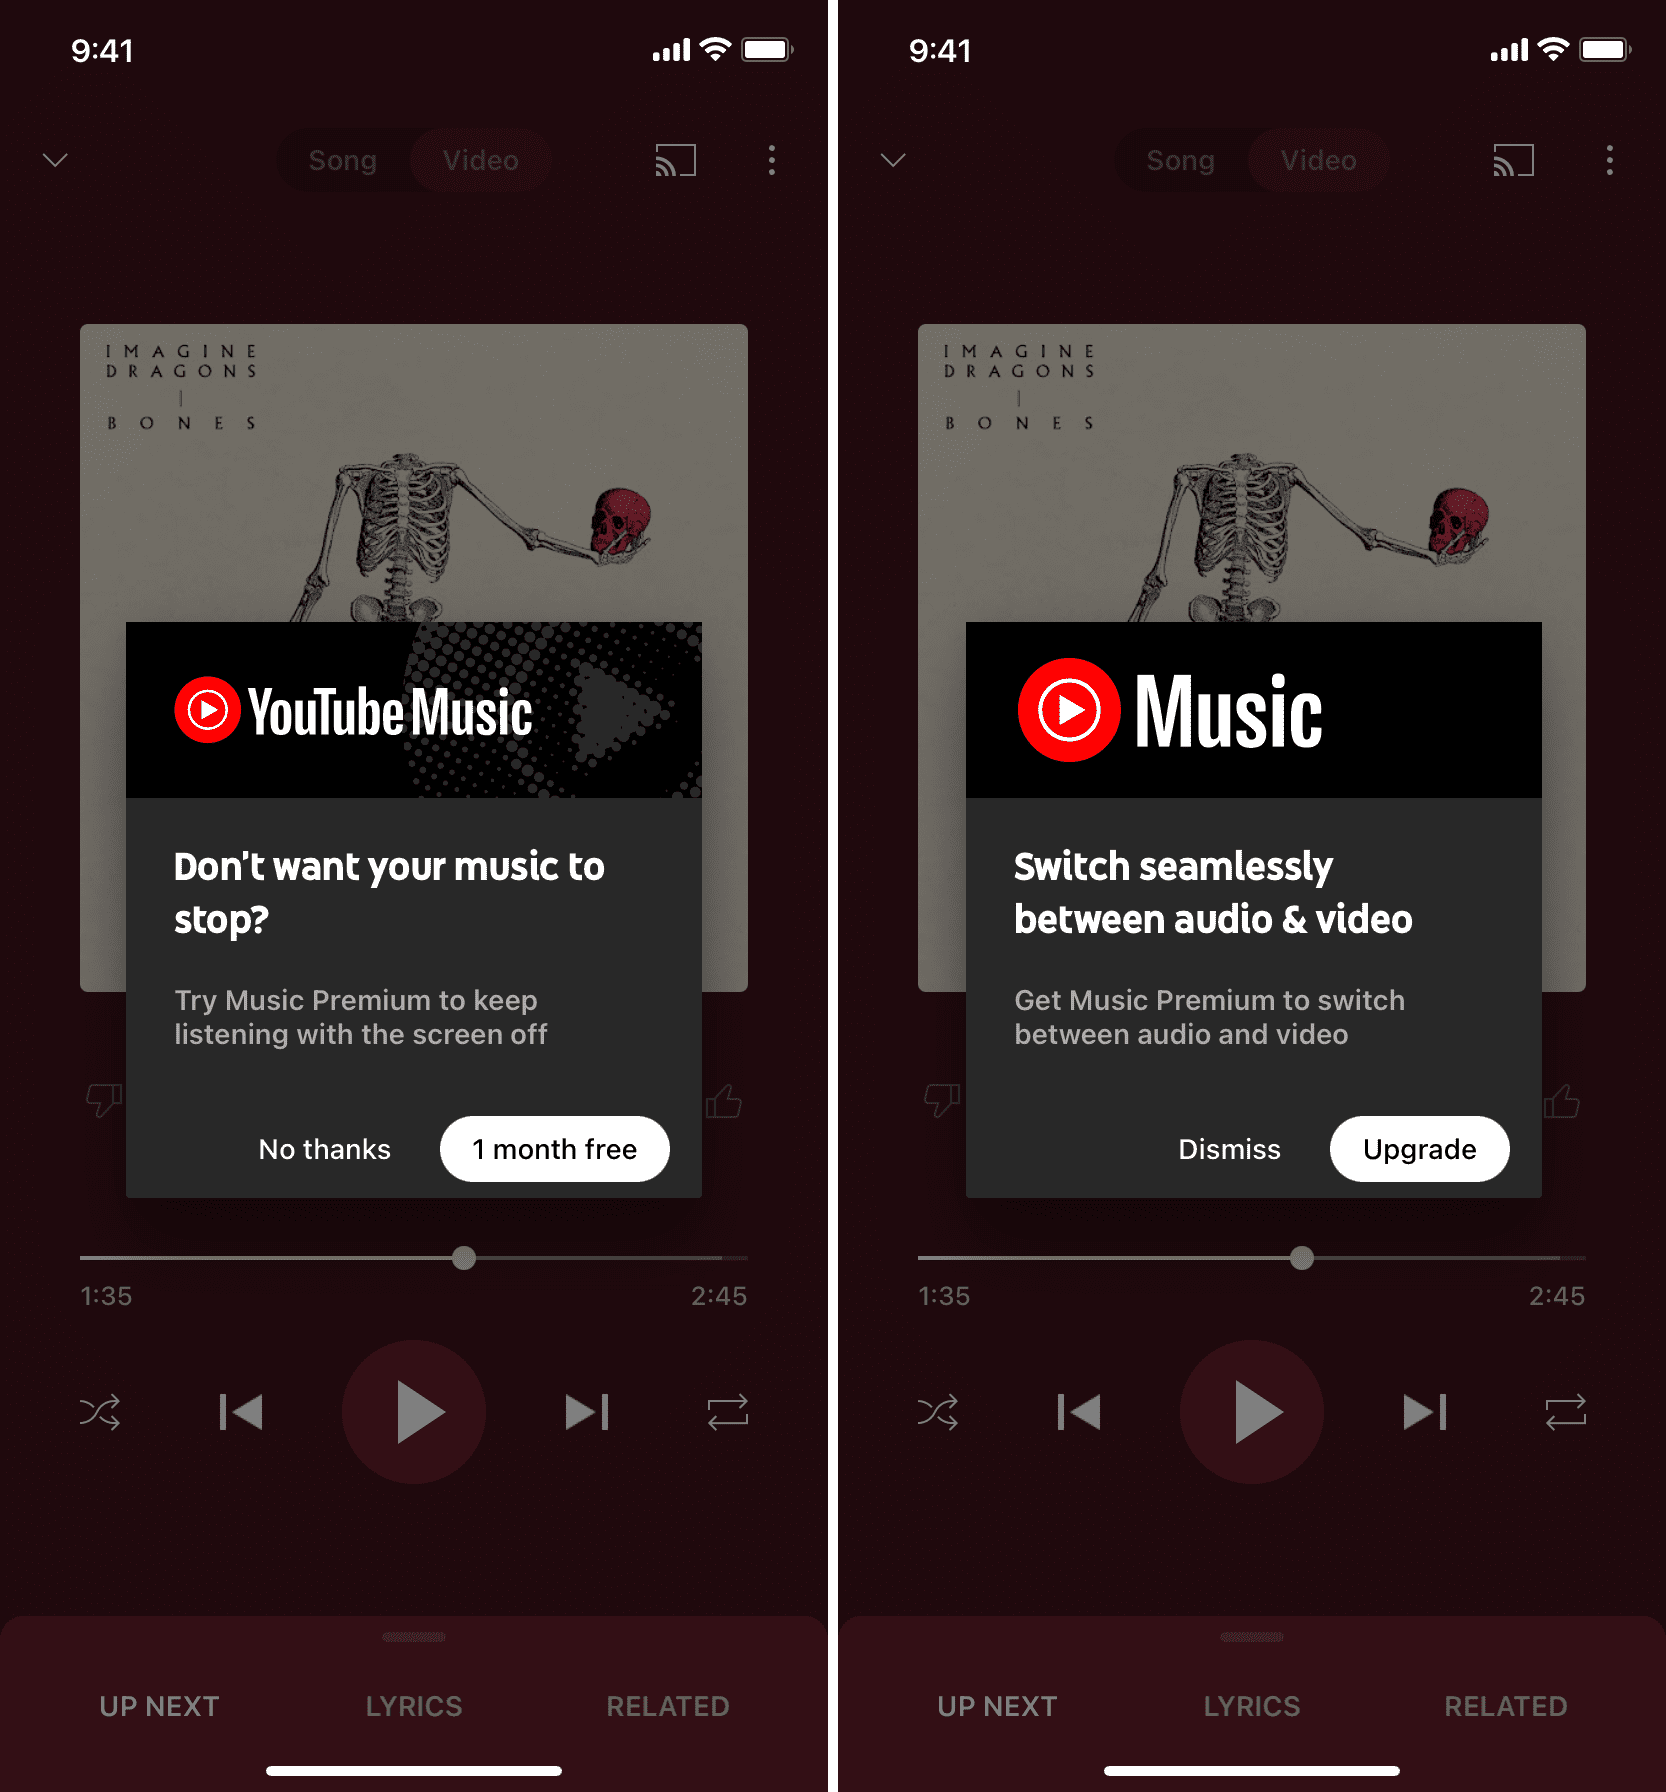 Buy Premium plan to play YouTube Music in background and use audio and video modes